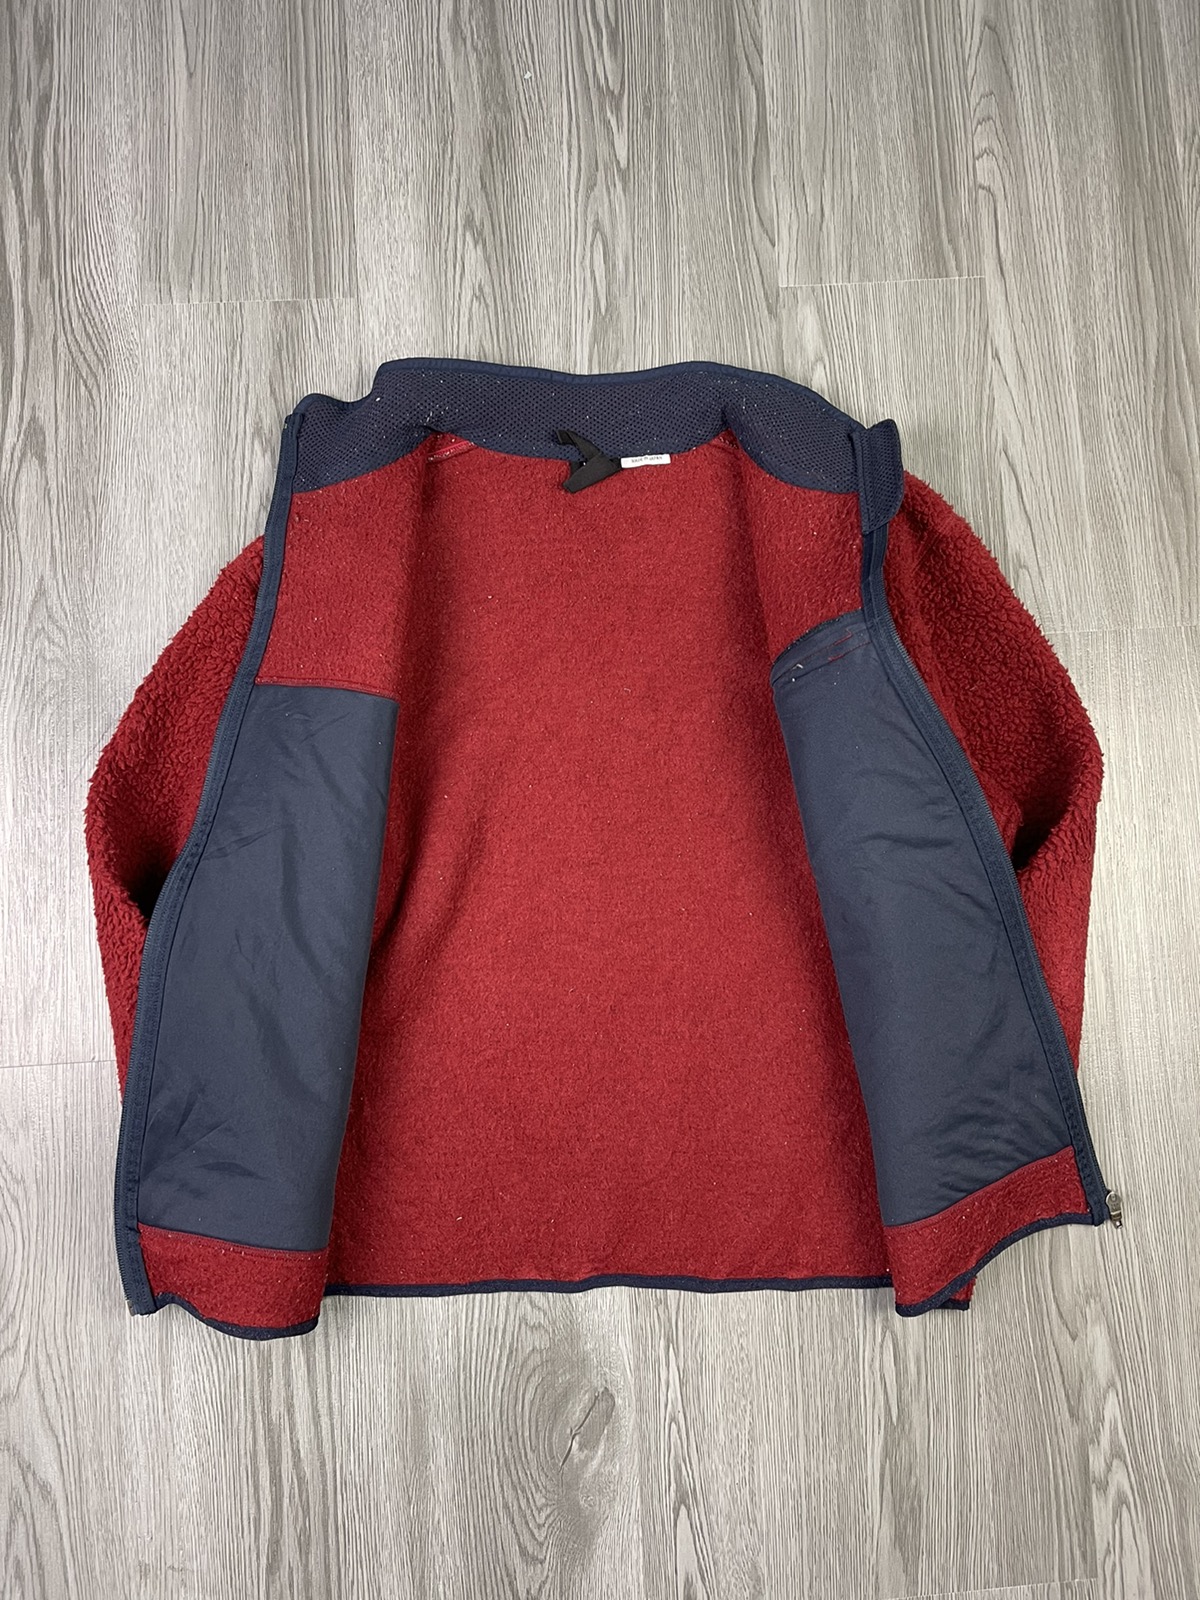 Red maroon The North Face fleece jacket - 6